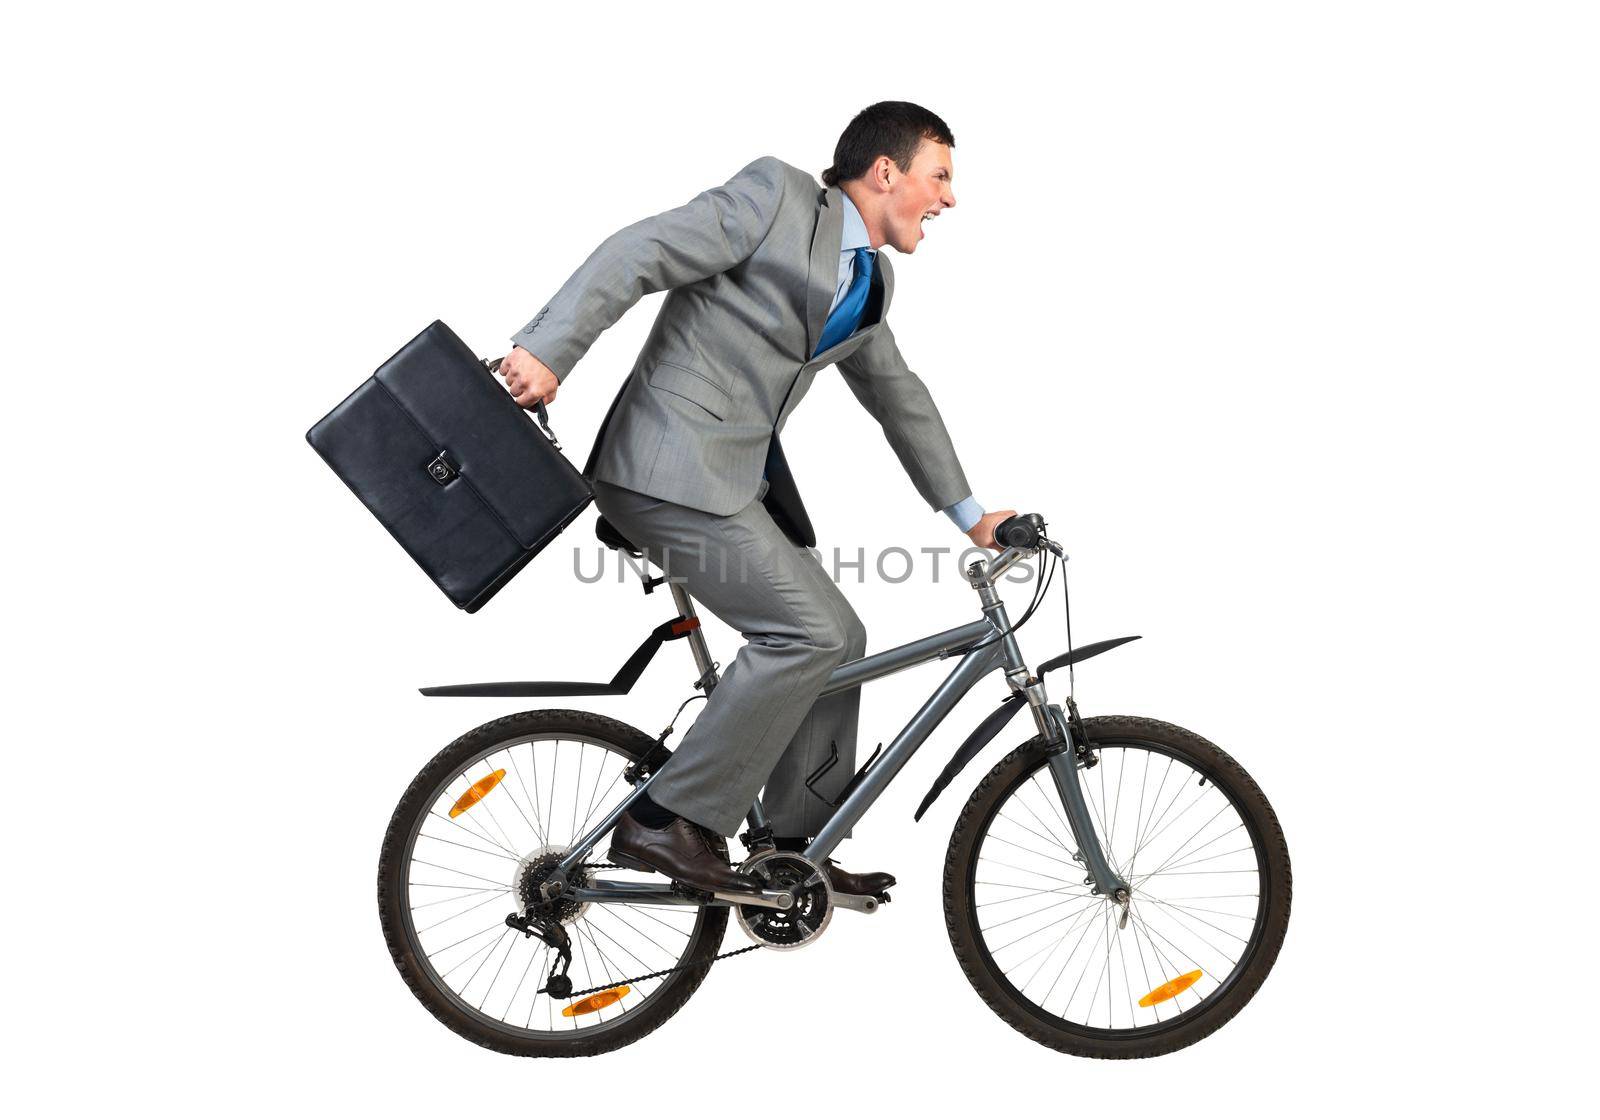 Businessman on bike hurry to work. Young man scared to be late. Corporate employee in grey business suit with suitcase riding bicycle. Male cyclist isolated on white background. Rush hour concept